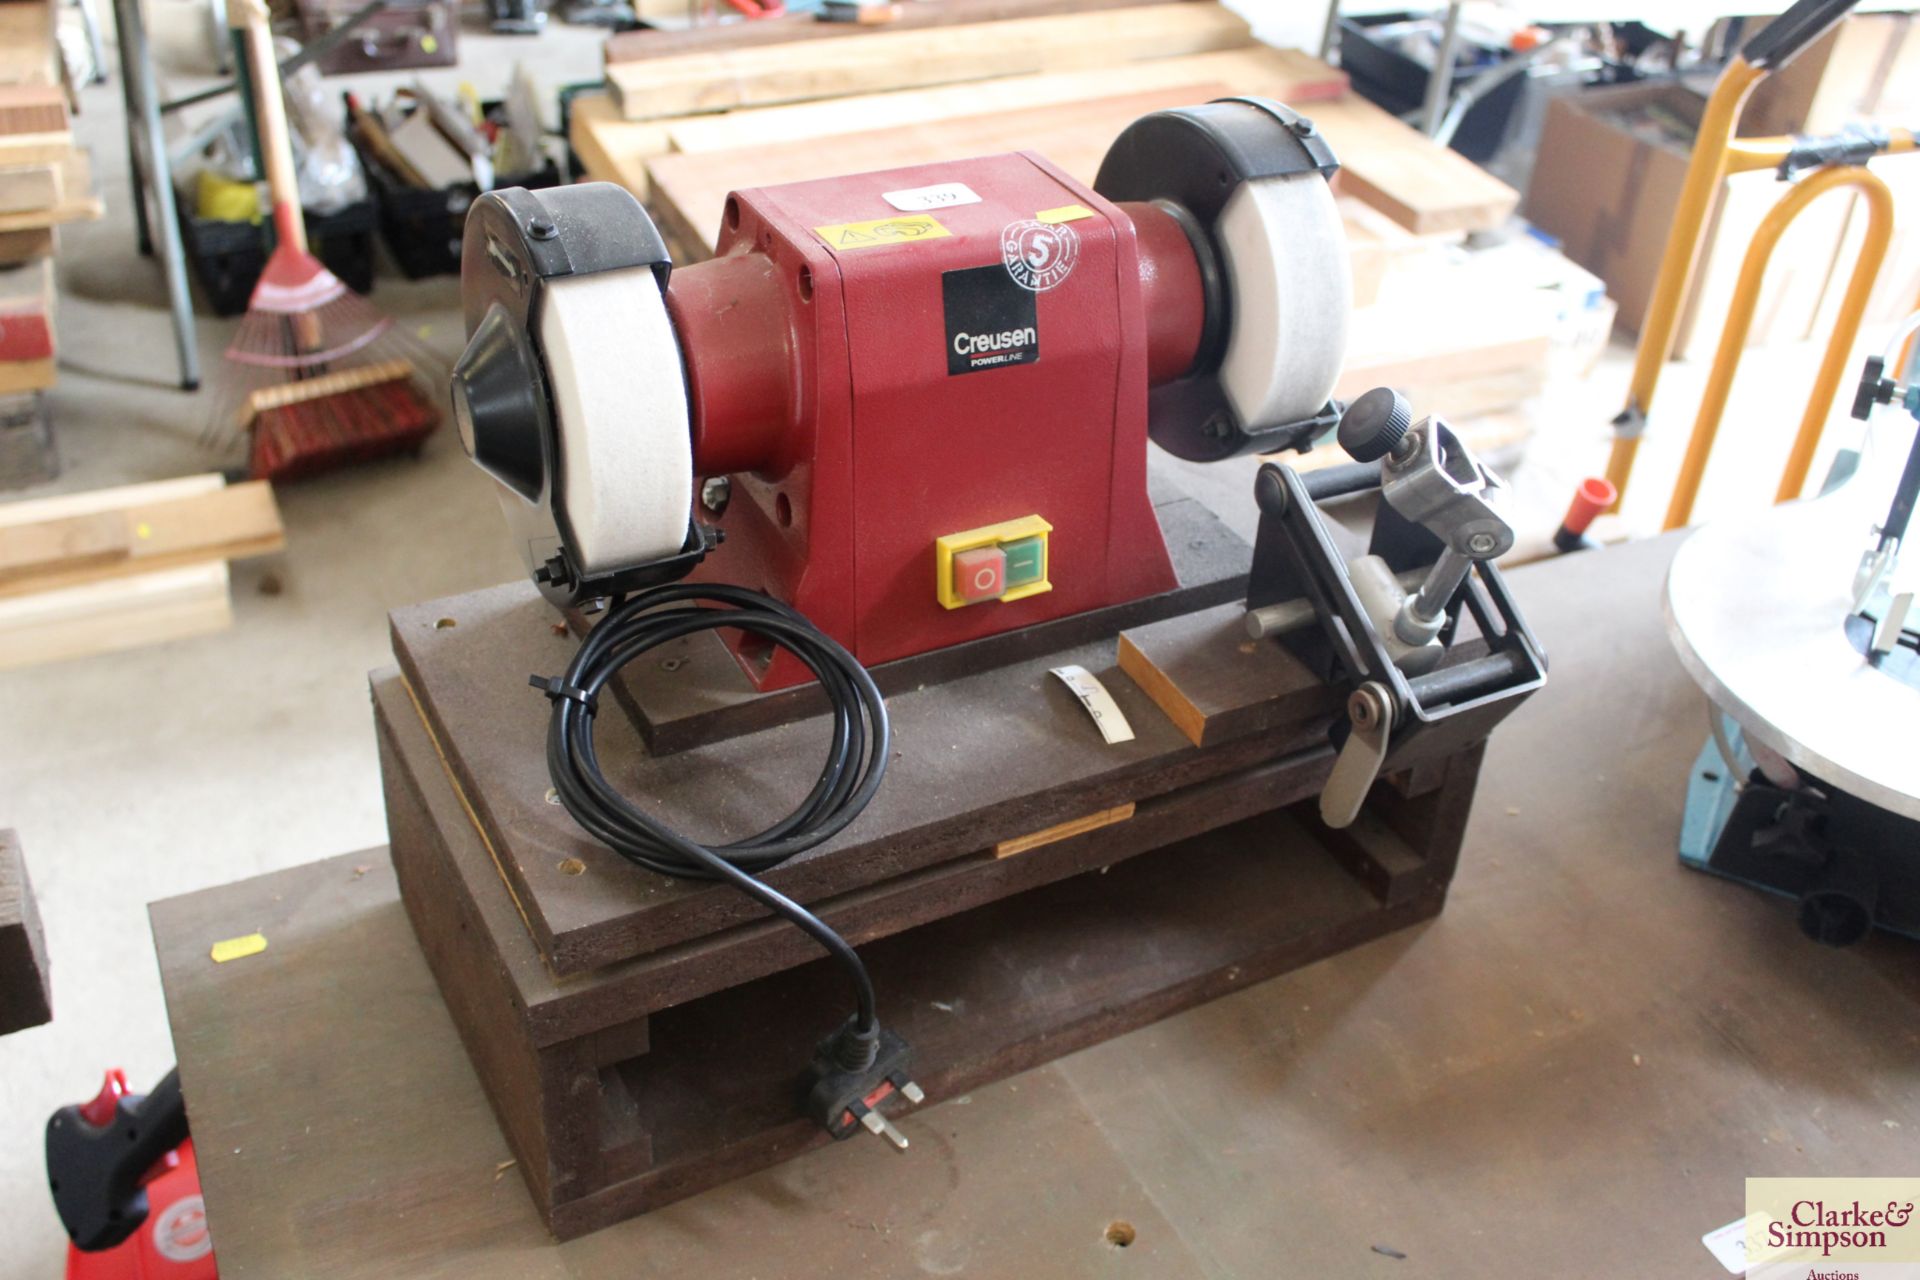 Creusen DS7500TS 240v double bench grinder with sharpening guide on wooden plinth.